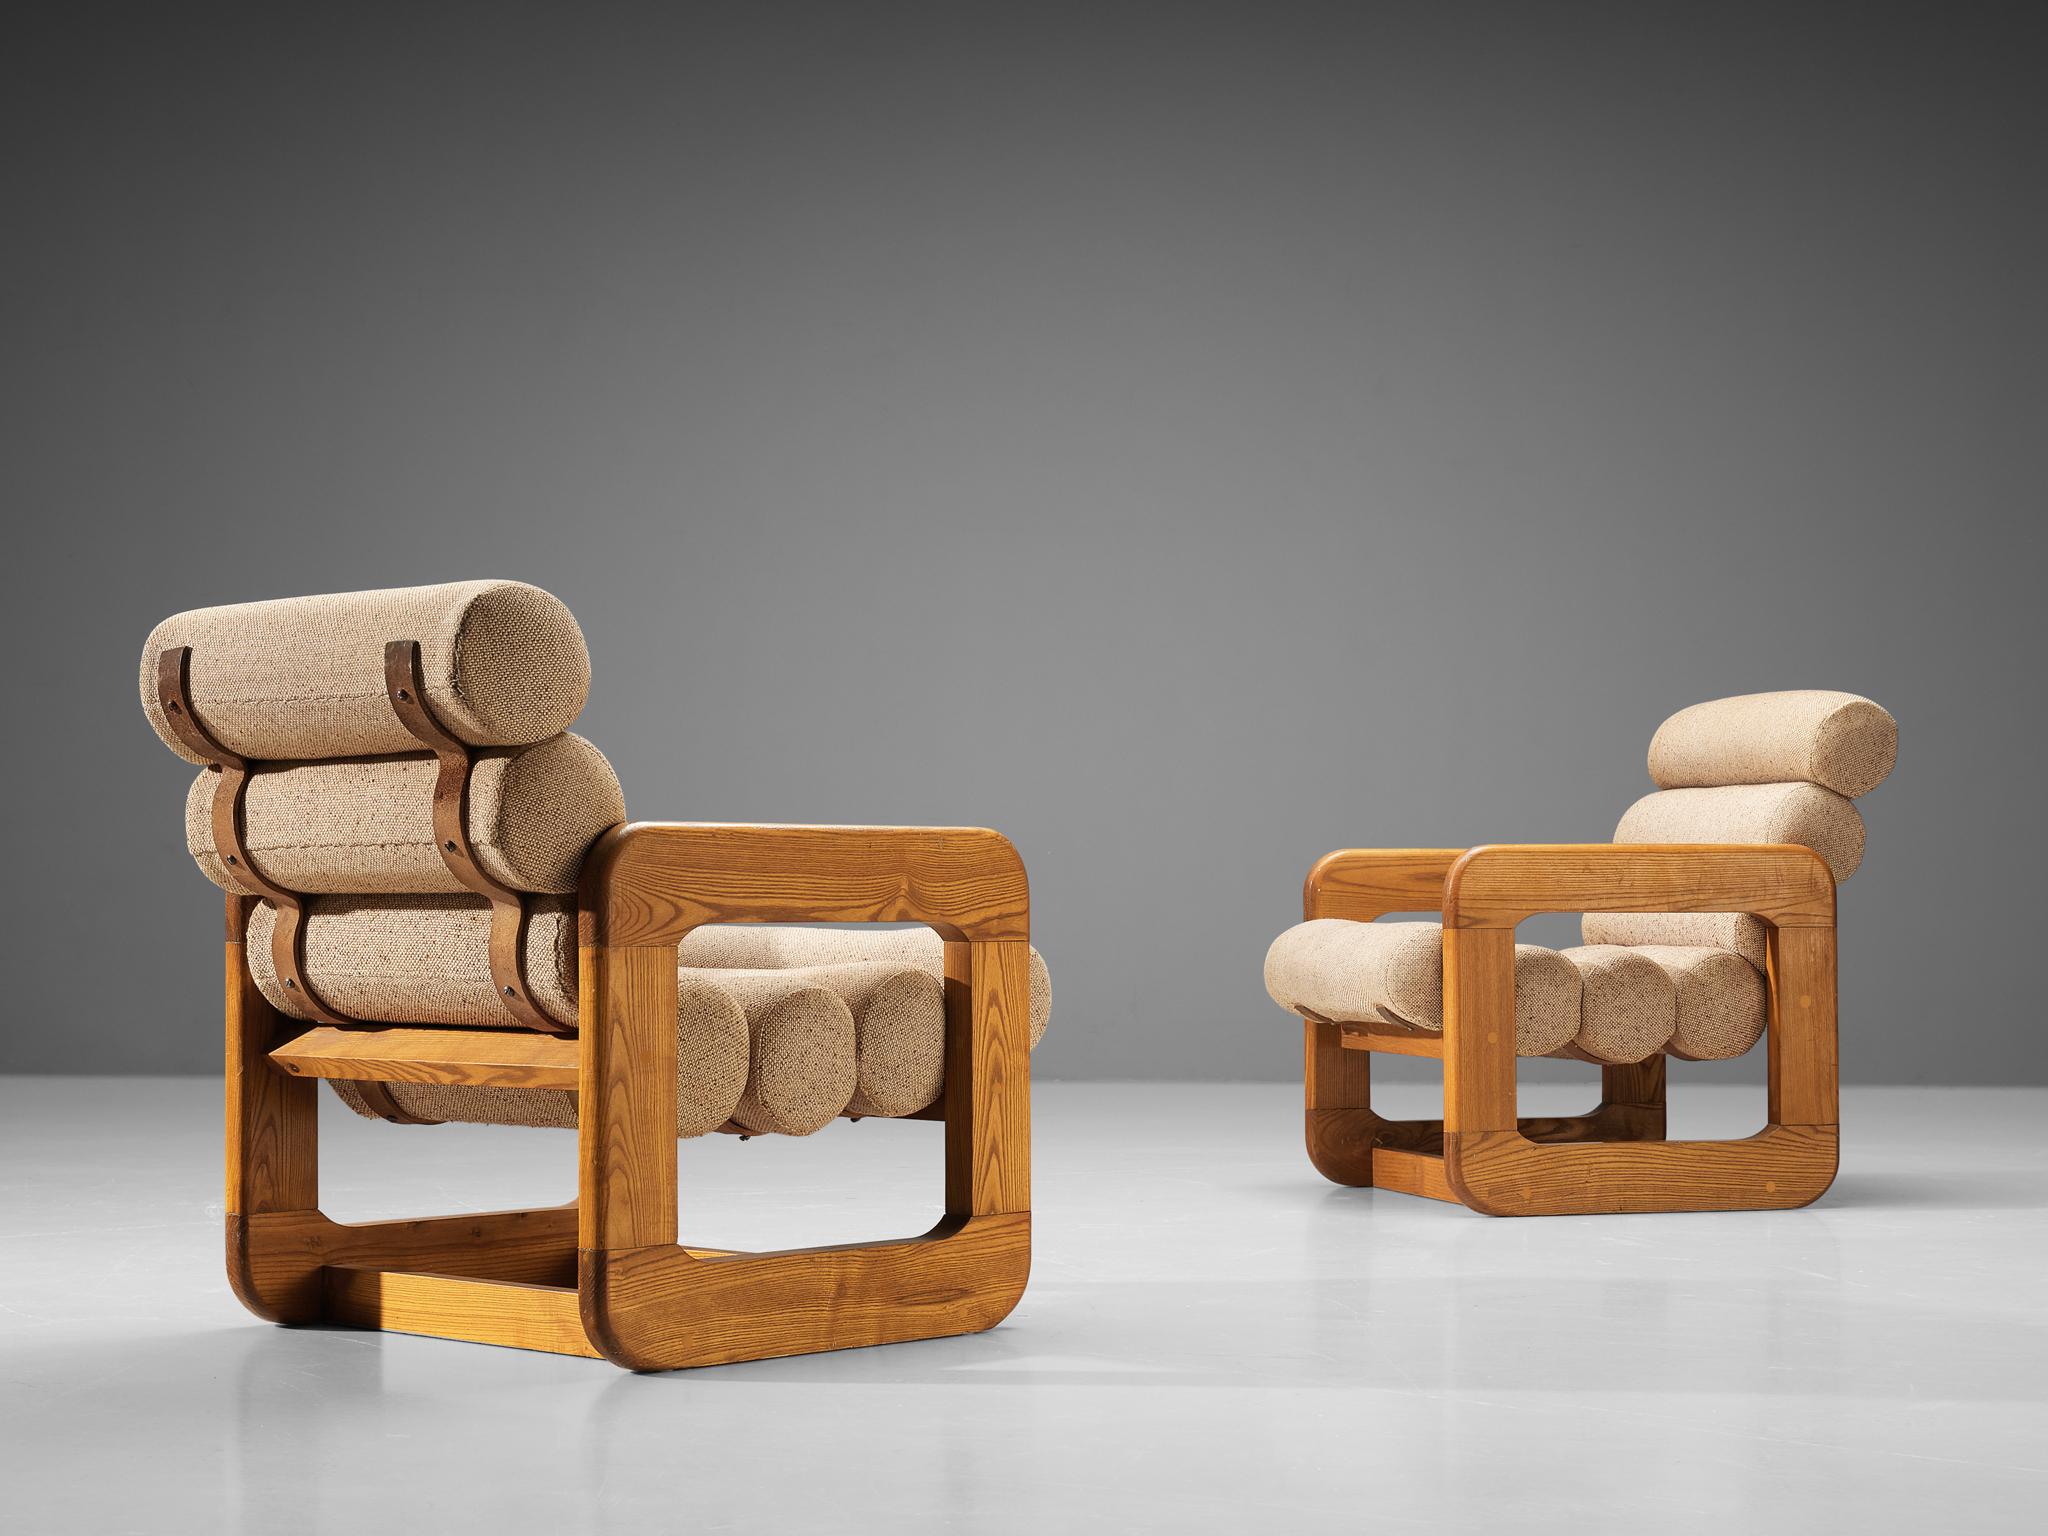 Lounge chairs, ash, fabric, Europe, 1970s. 

Pair of two unconvential lounge chairs that feature an outstanding design. The seating contains multiple tube-shaped cushions attached together to create a seat and backrest. The repetition of the